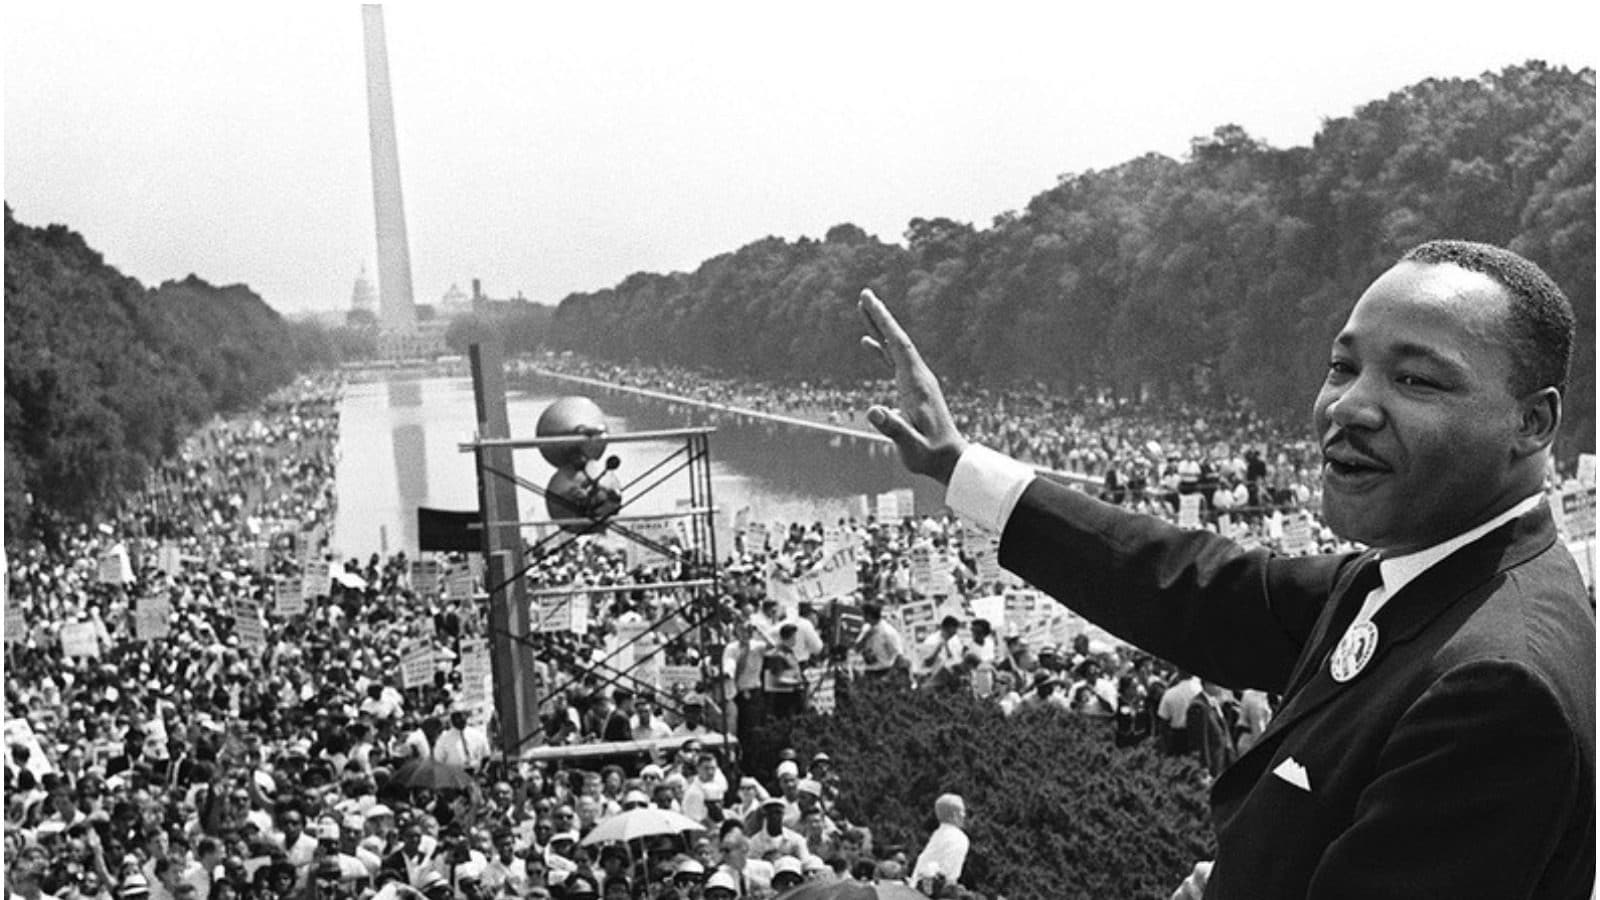 on-this-day-in-1963-martin-luther-king-jr-delivers-i-have-a-dream-speech